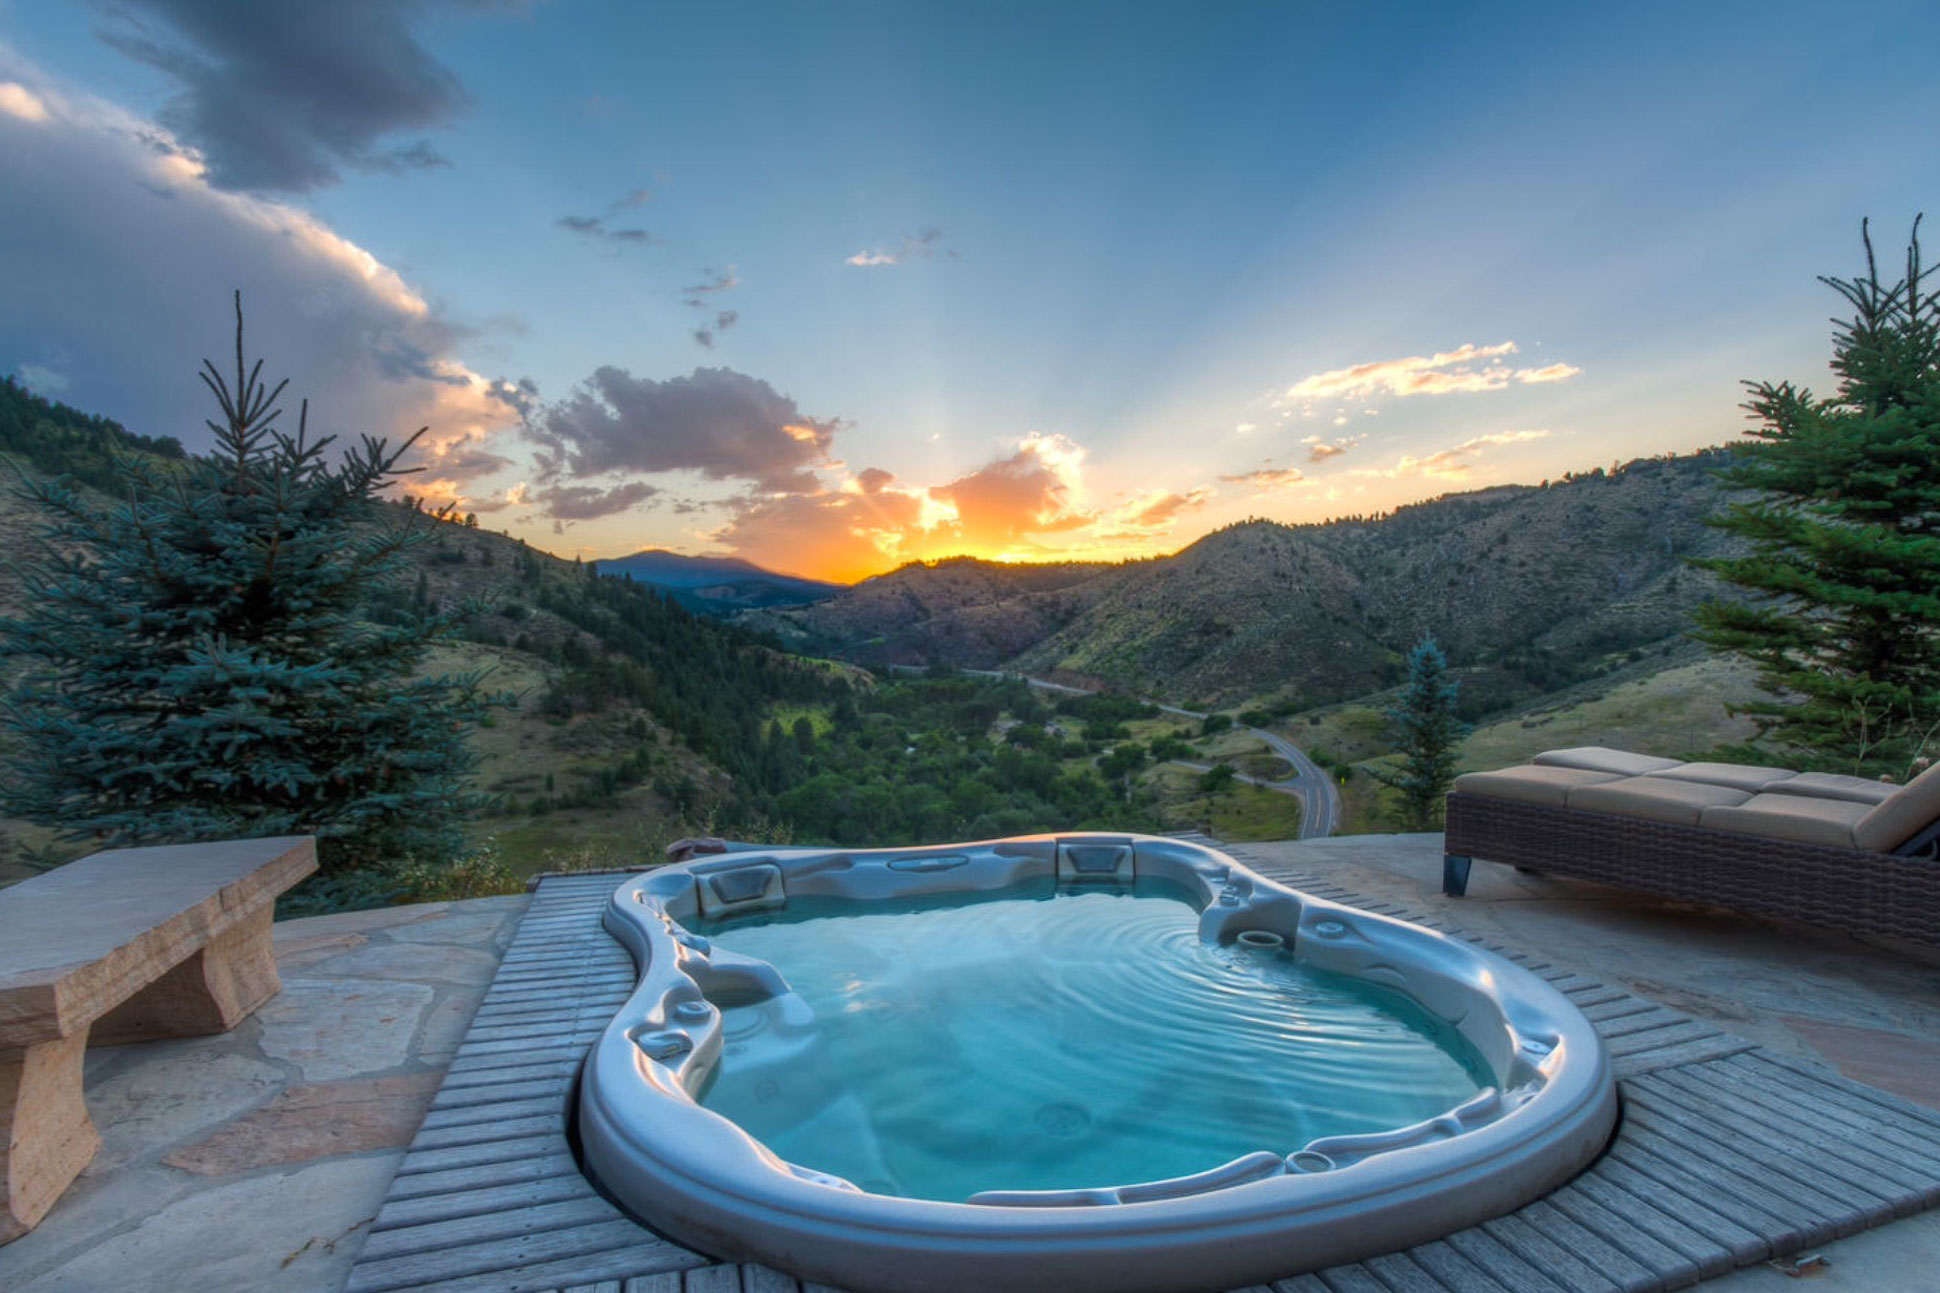 Hot tub with panoramic views of Colorado hills by sunset.